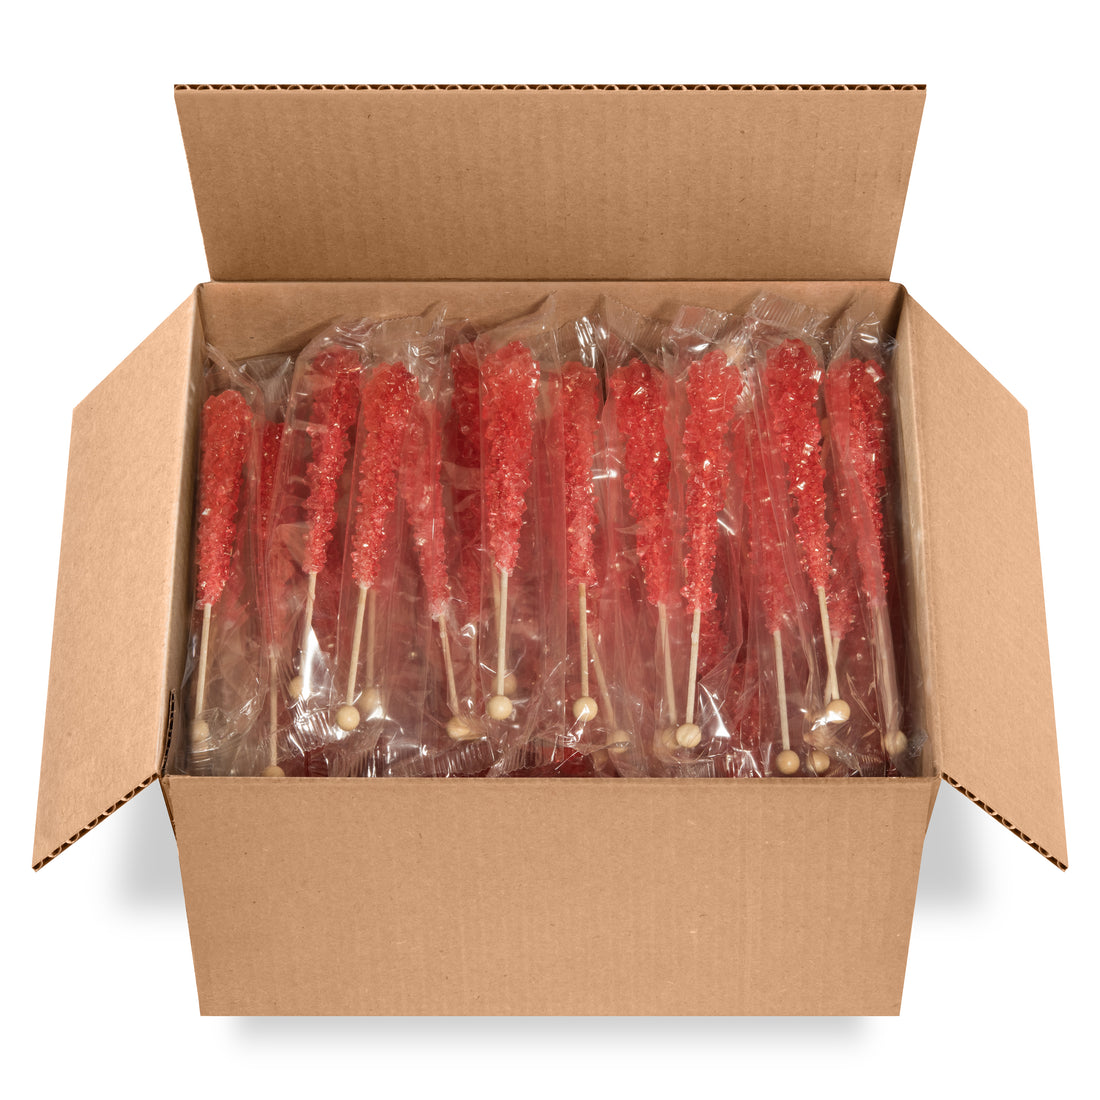 Red Rock Candy Crystal Sticks - Strawberry Flavor